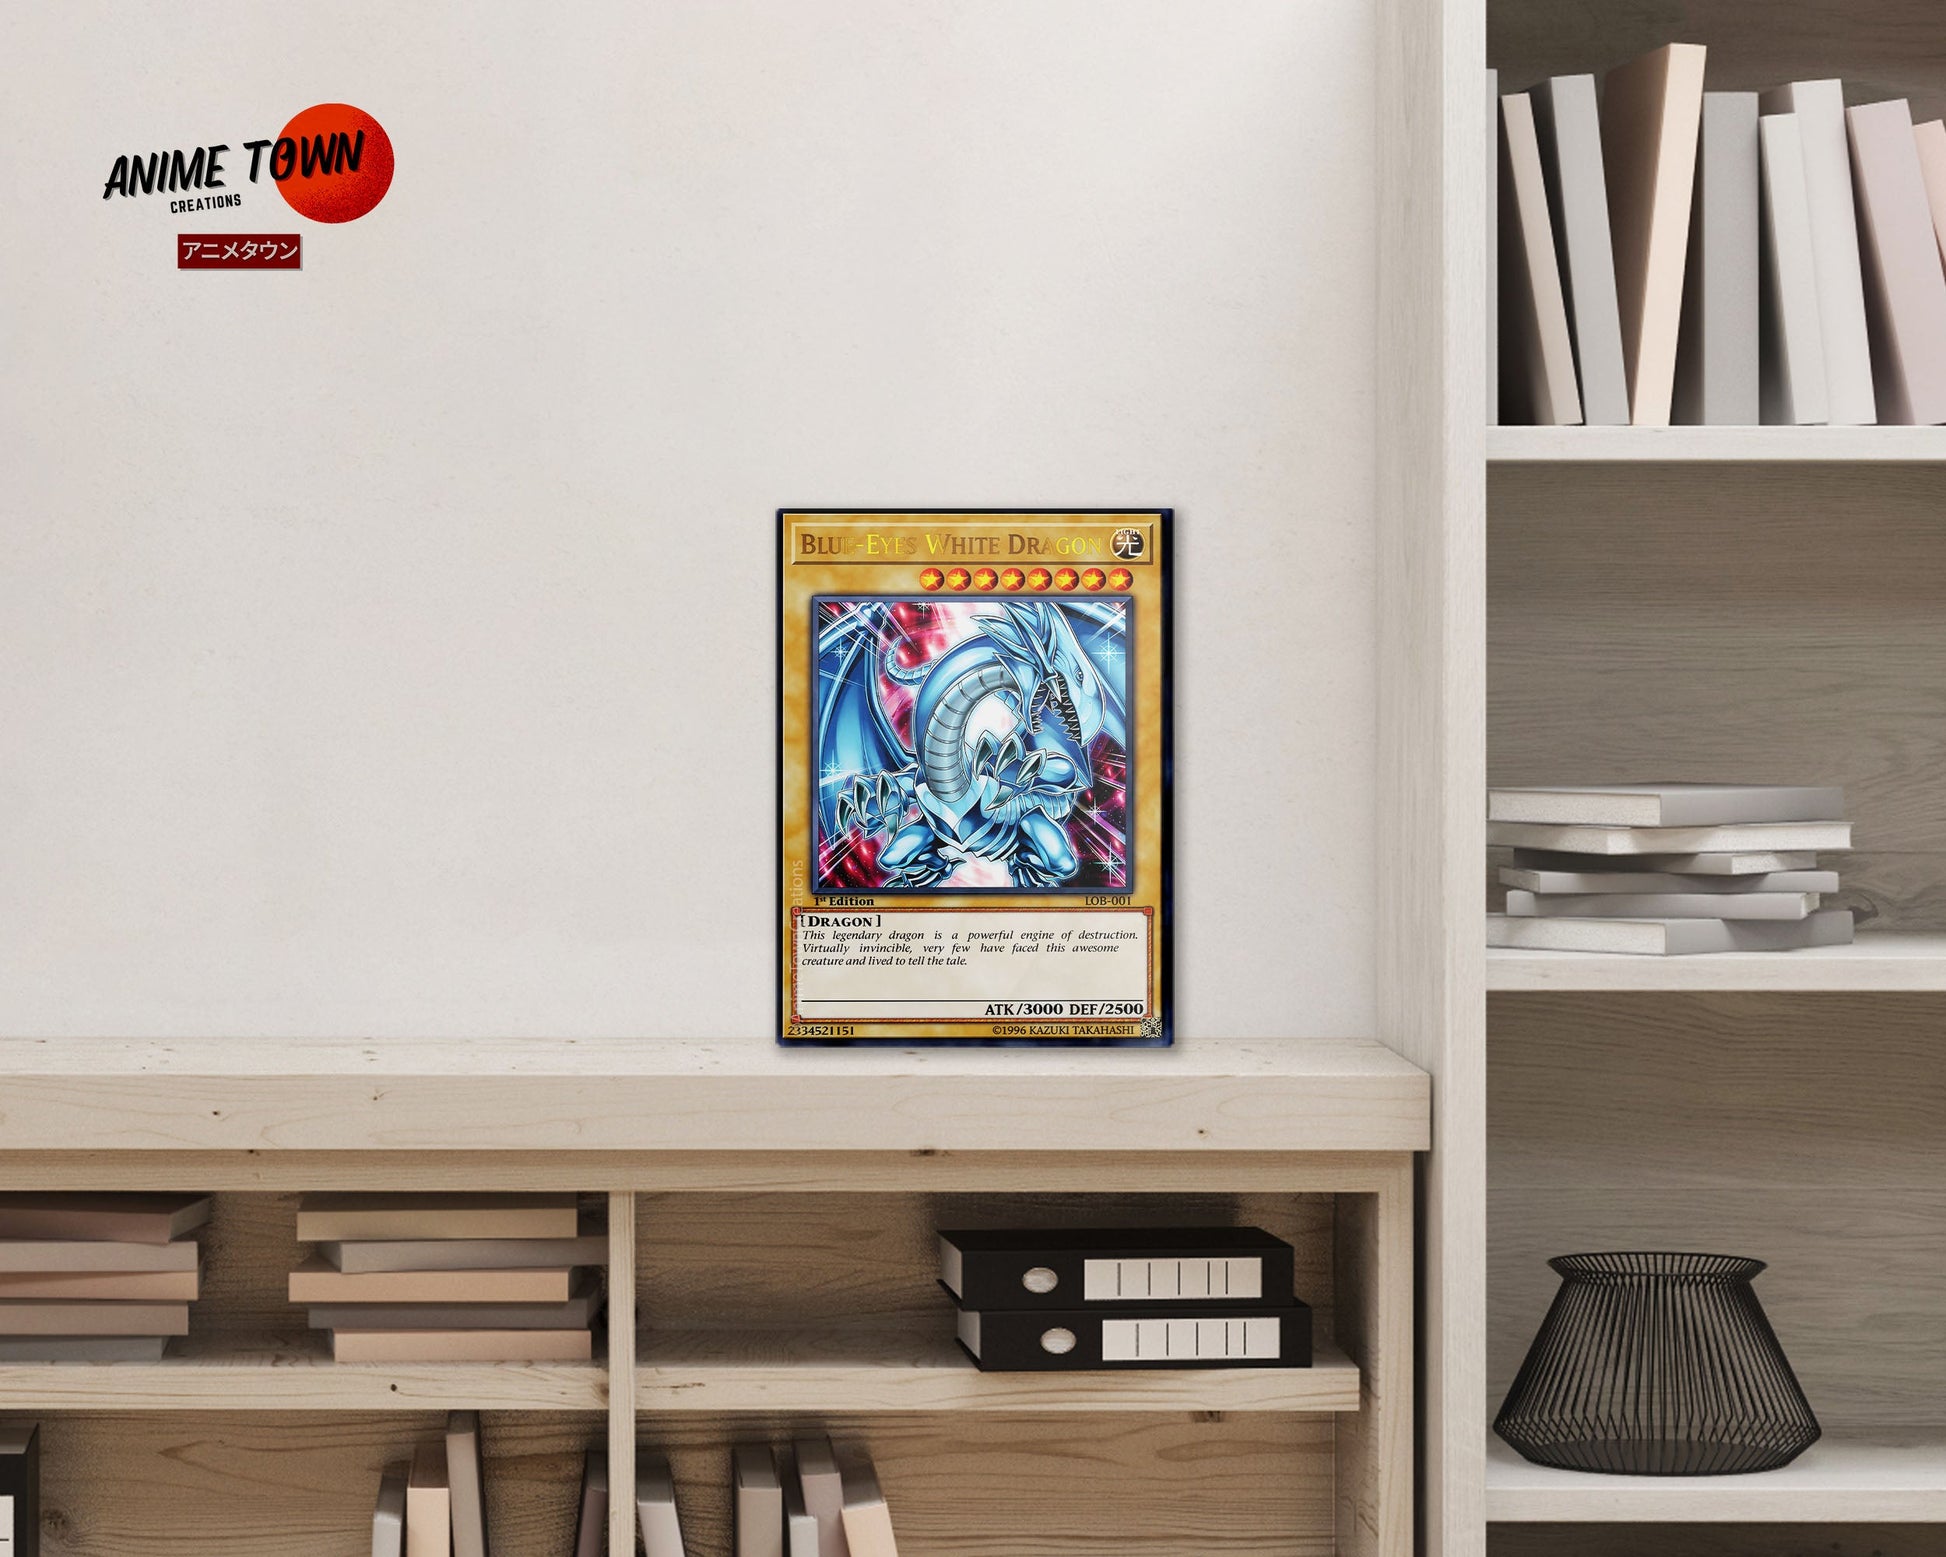 Anime Town Creations Metal Poster Yugioh Blue Eyes White Dragon 1st Edition Card 5" x 7" Home Goods - Anime Yu-Gi-Oh Metal Poster